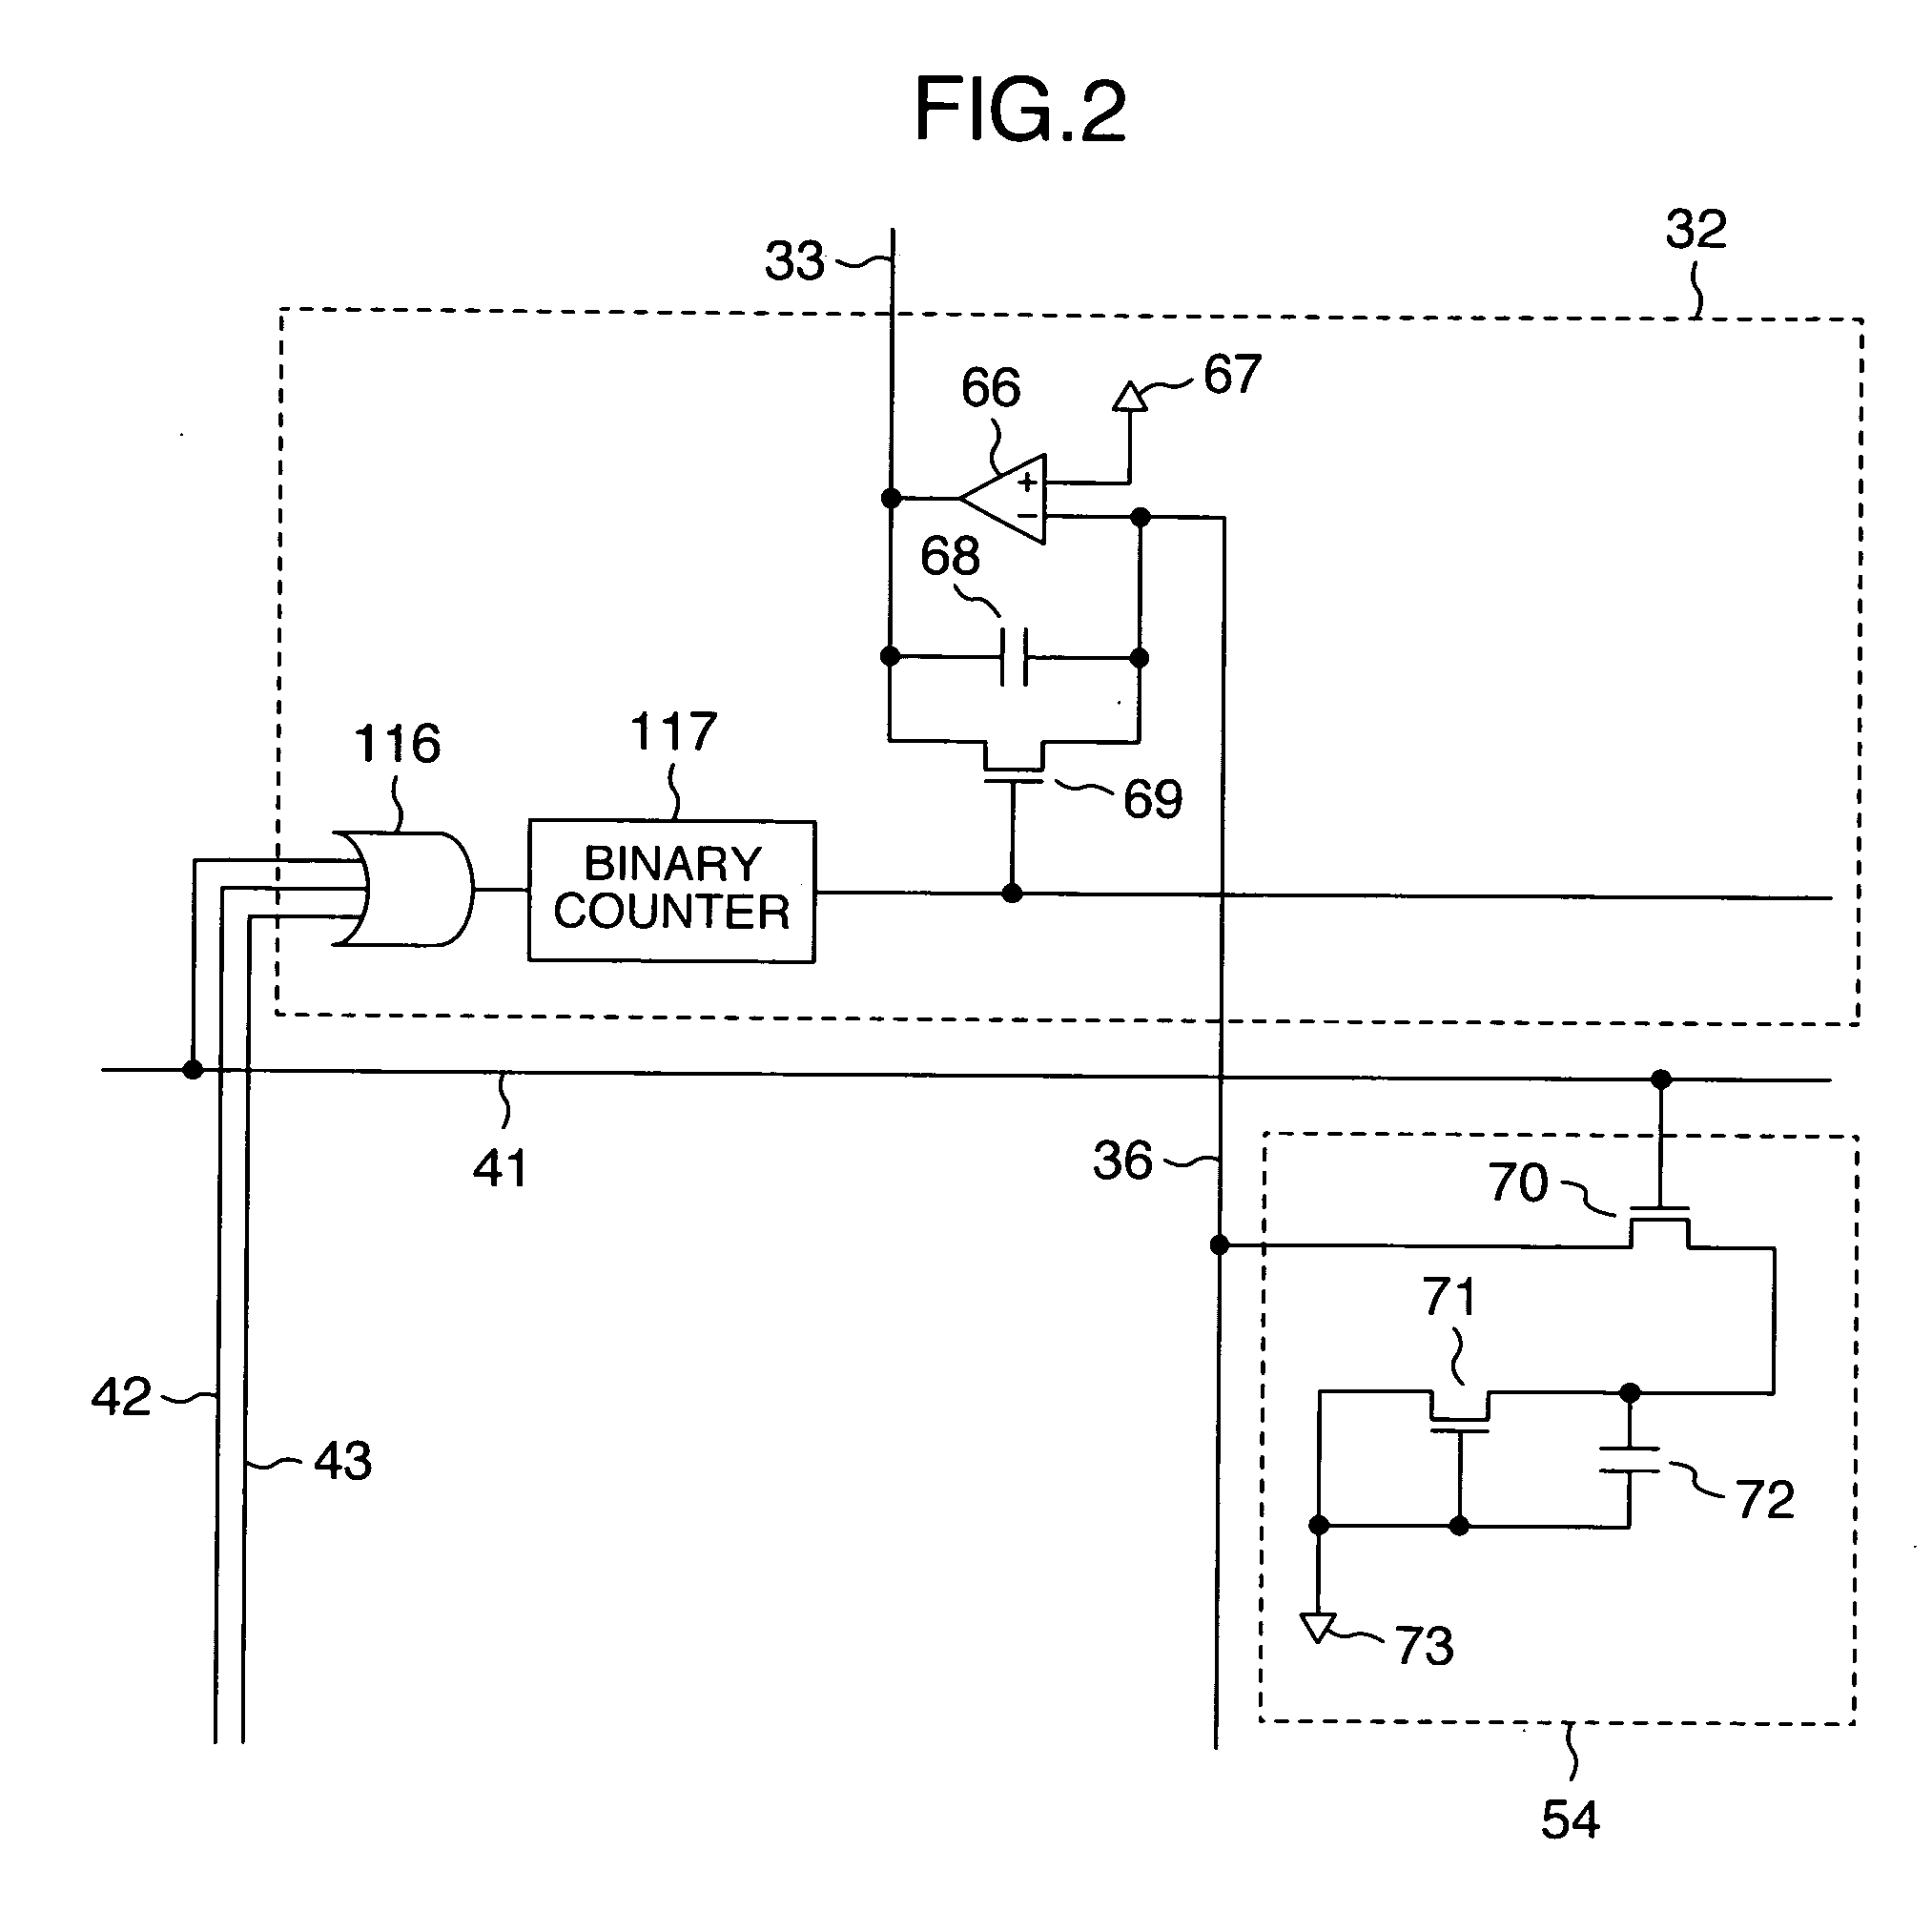 Display device with a touch screen